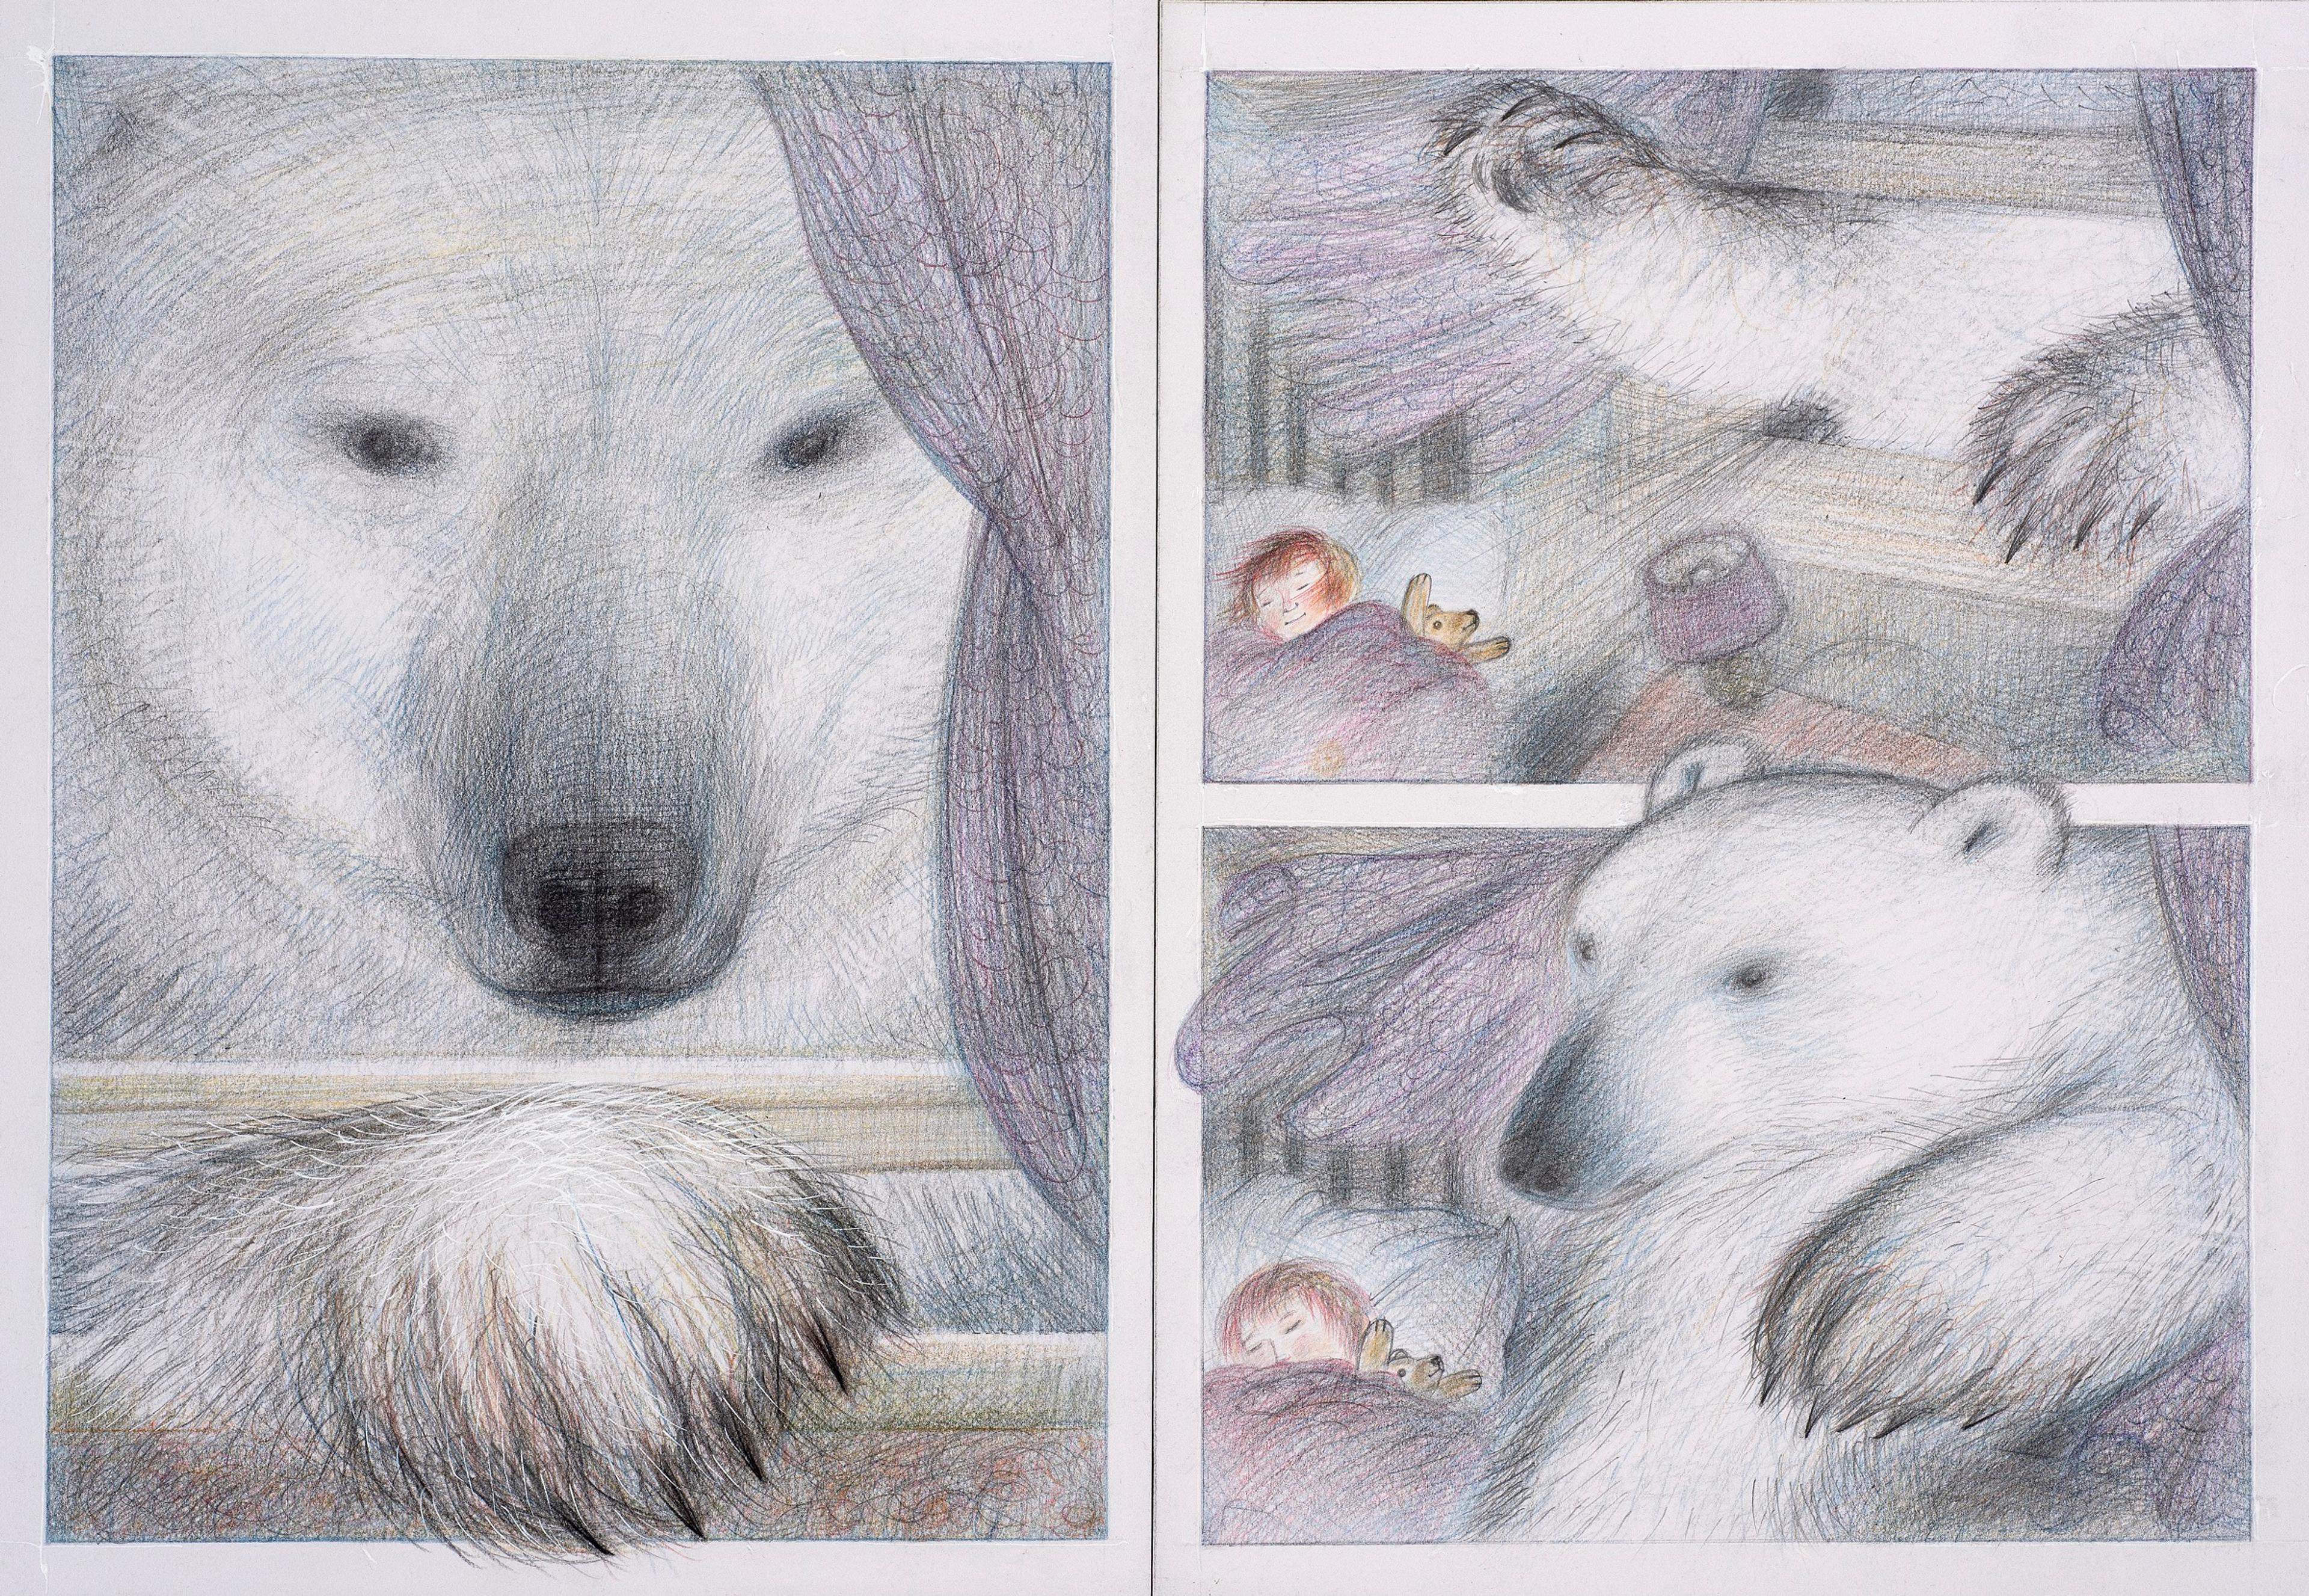 Illustration in three panels showing a giant bear going through a window into a sleeping child's bedroom